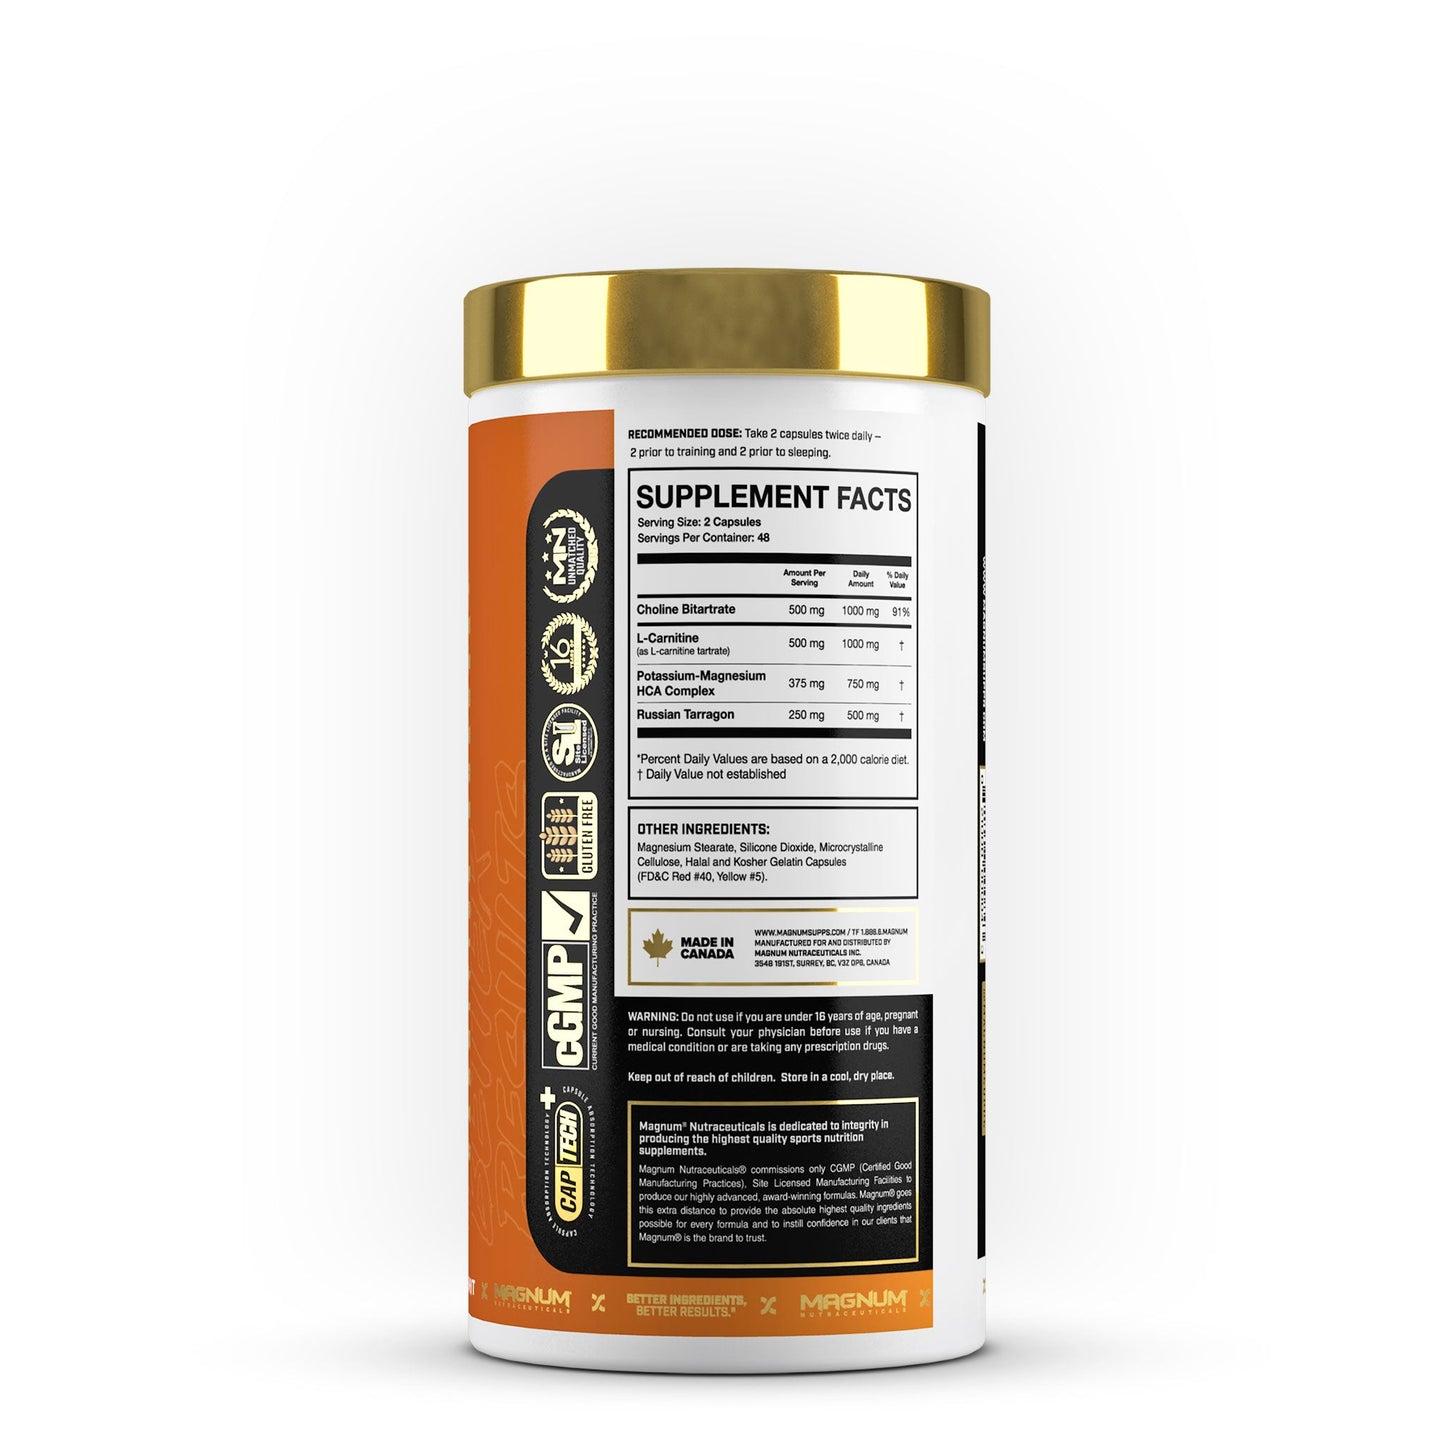 Side view, Carne Diem, Carnitine Burner, supplement facts, Made in Canada